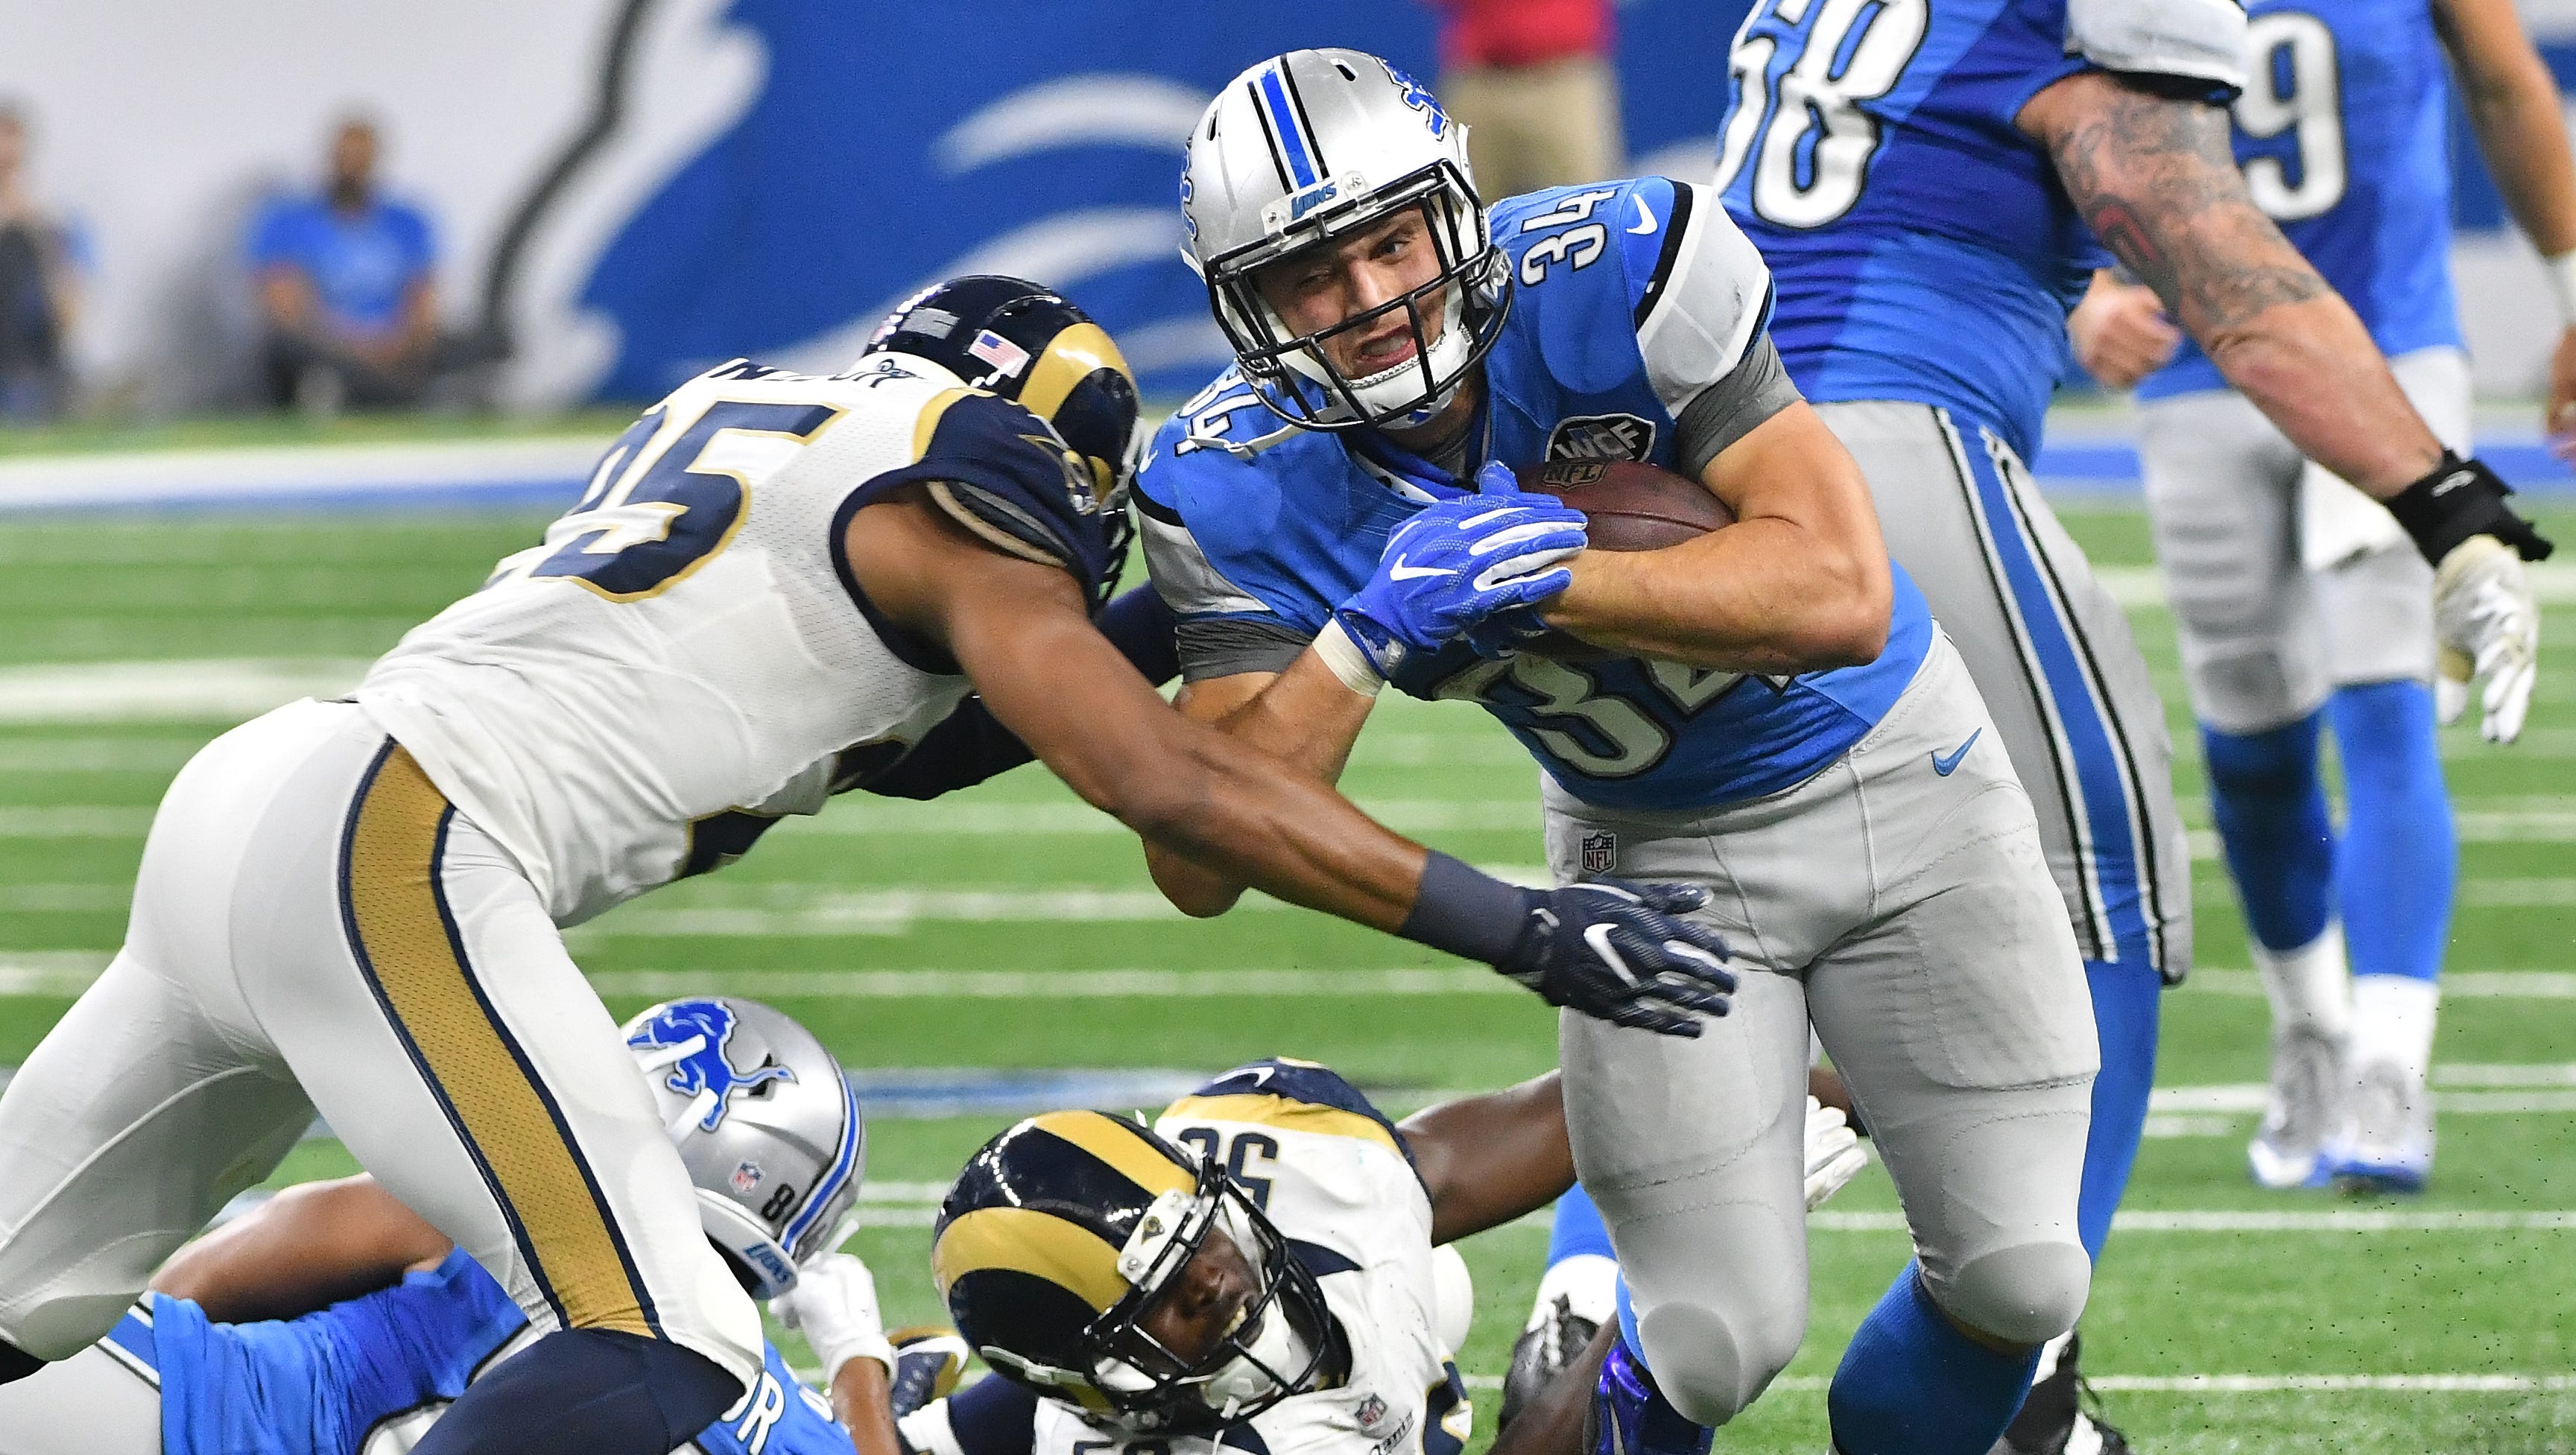 Lions running back Zach Zenner rumbles for yardage late in the fourth quarter, with Rams T.J. McDonald eventually bringing him down.